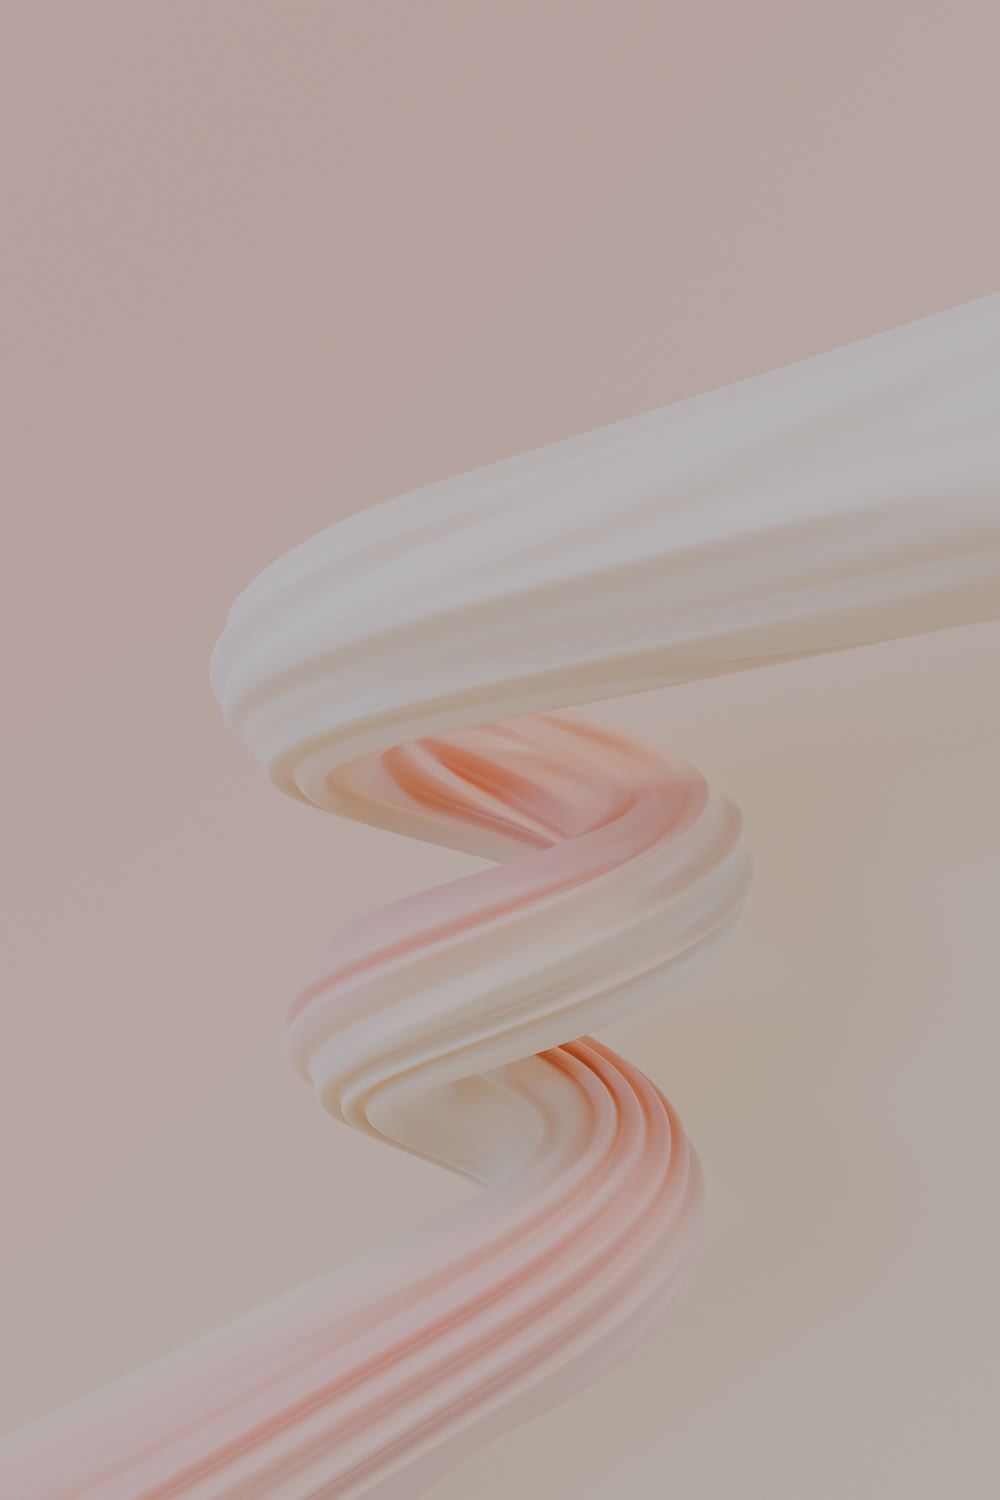 an abstract photo of a pink and white object